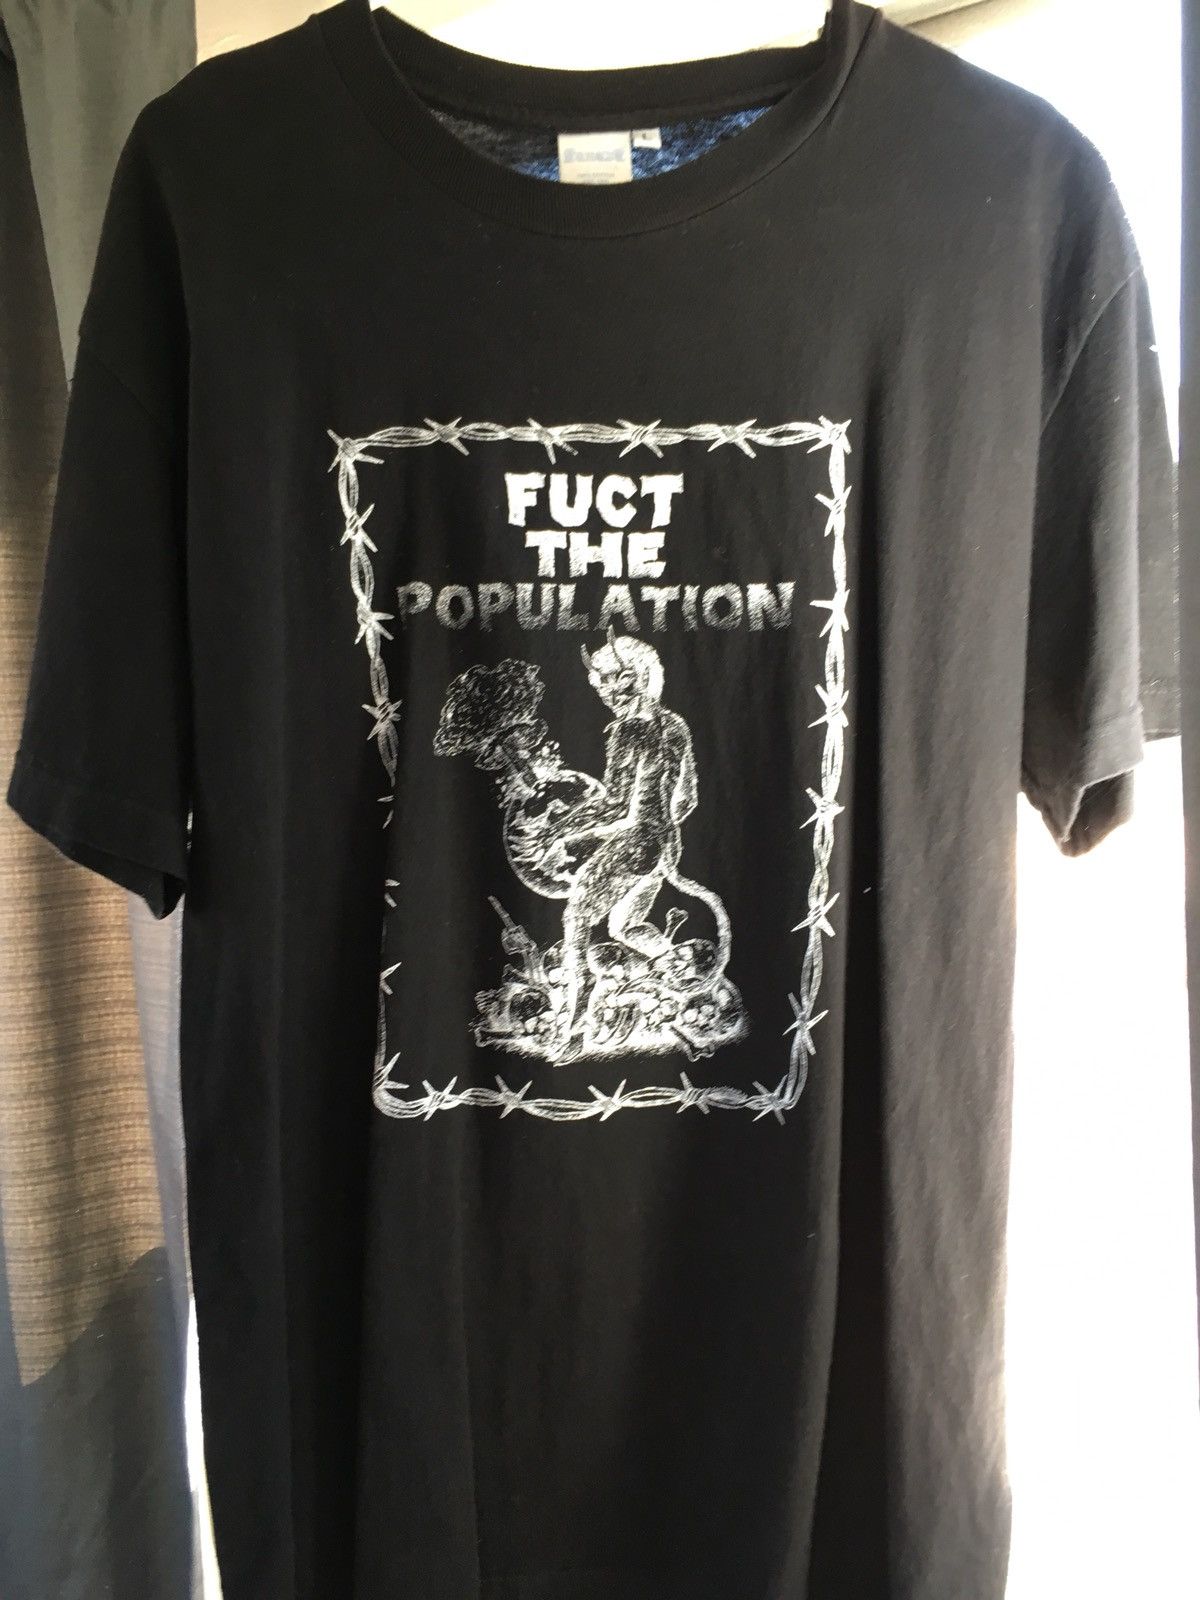 Fuct FTP X Fuct “Fuct The Population Devil Tee” Size US L / EU 52-54 / 3 - 1 Preview